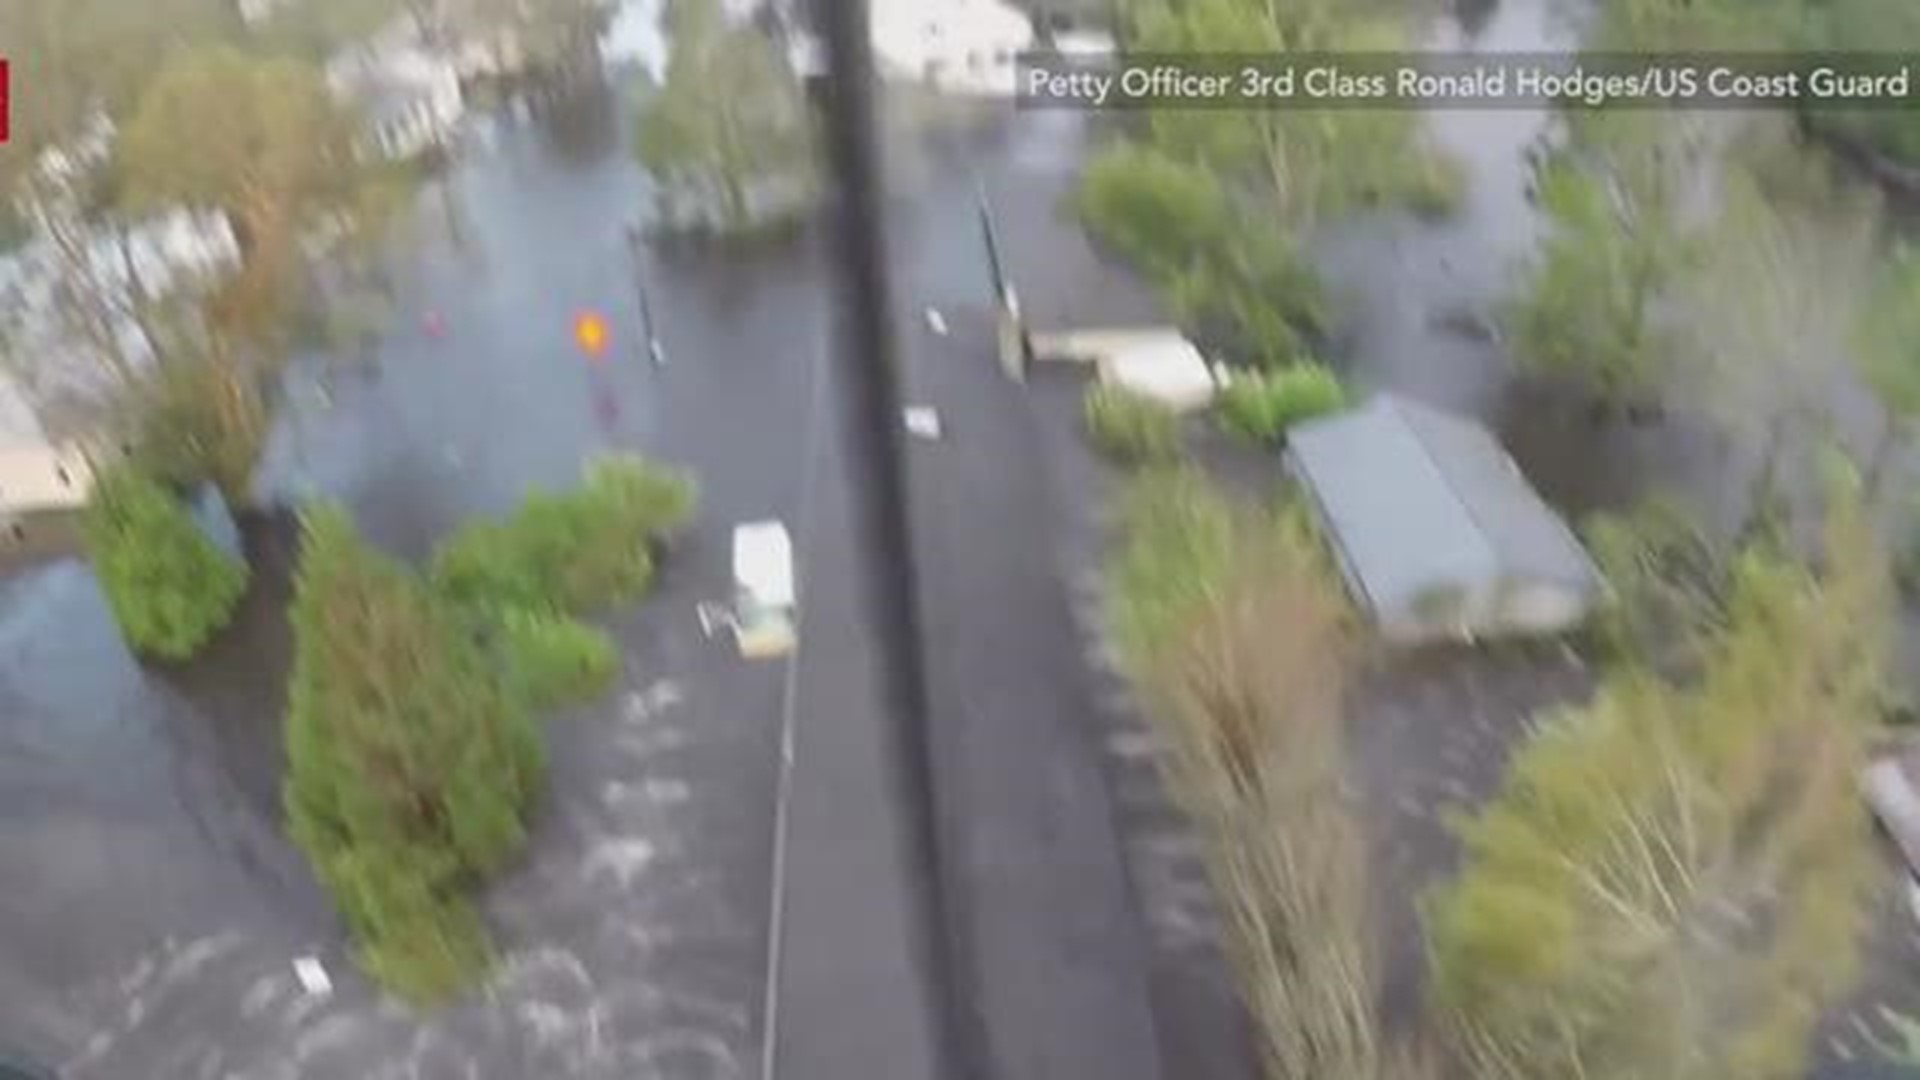 The US Coast Guard rescued a man and his dog from severe flooding near Wilmington, North Carolina, on September 17, in the wake of Hurricane Florence.